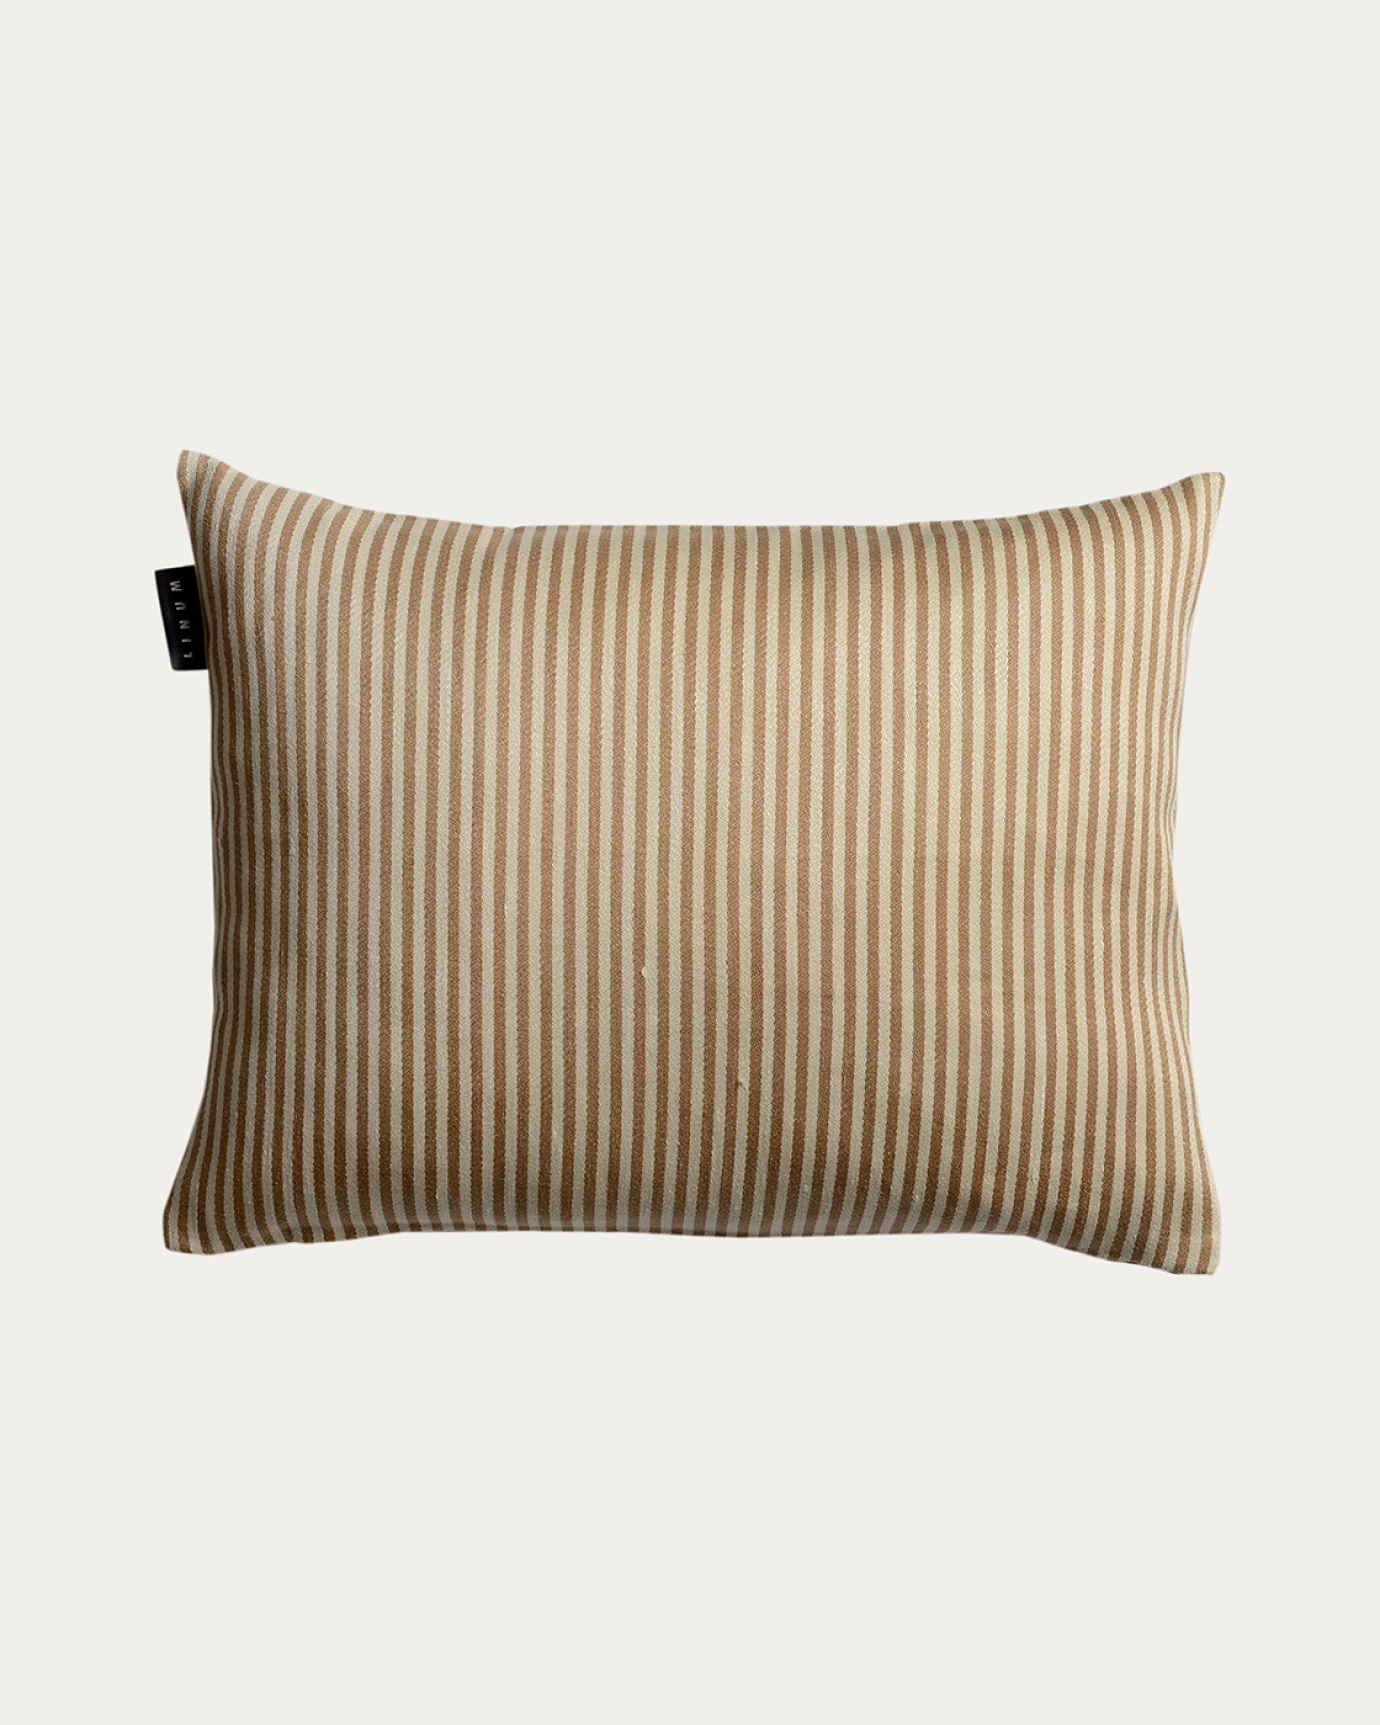 Product image camel brown CALCIO cushion cover with thin stripes of 77% linen and 23% cotton from LINUM DESIGN. Size 35x50 cm.